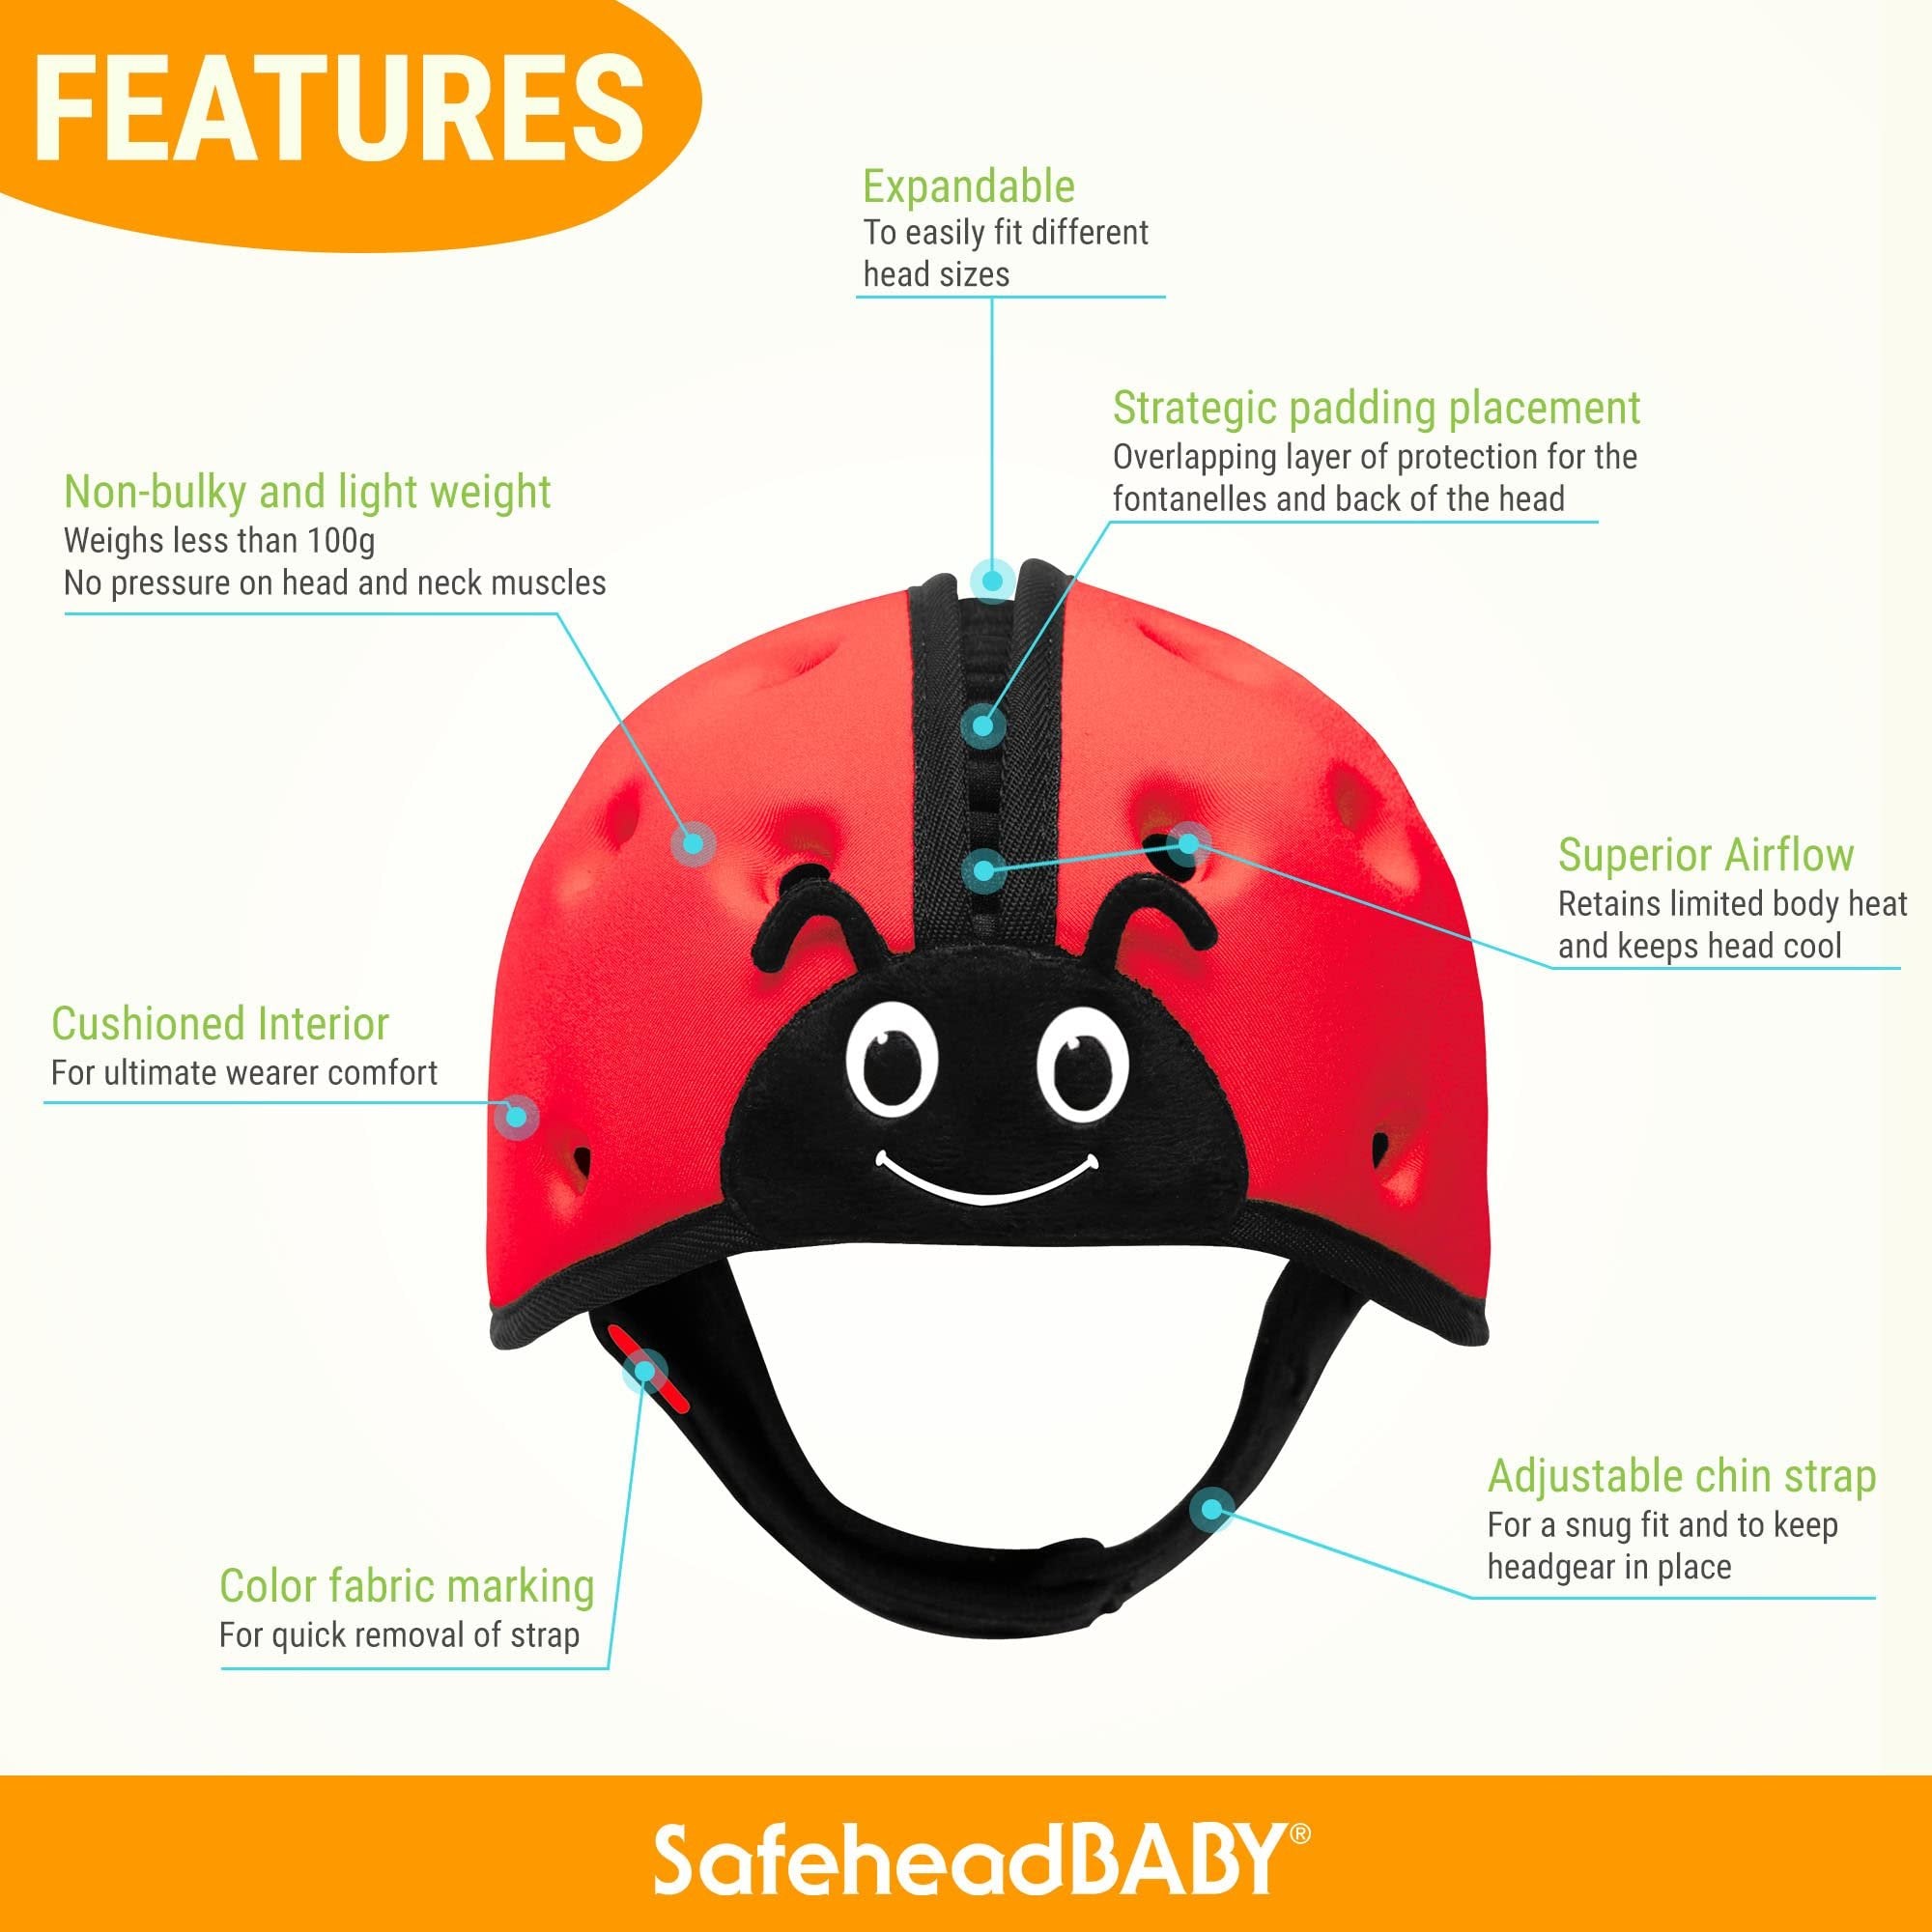 SafeheadBABY Toddler Safety Helmet, Expandable and Adjustable, Owl Pink, Size 1, Certified